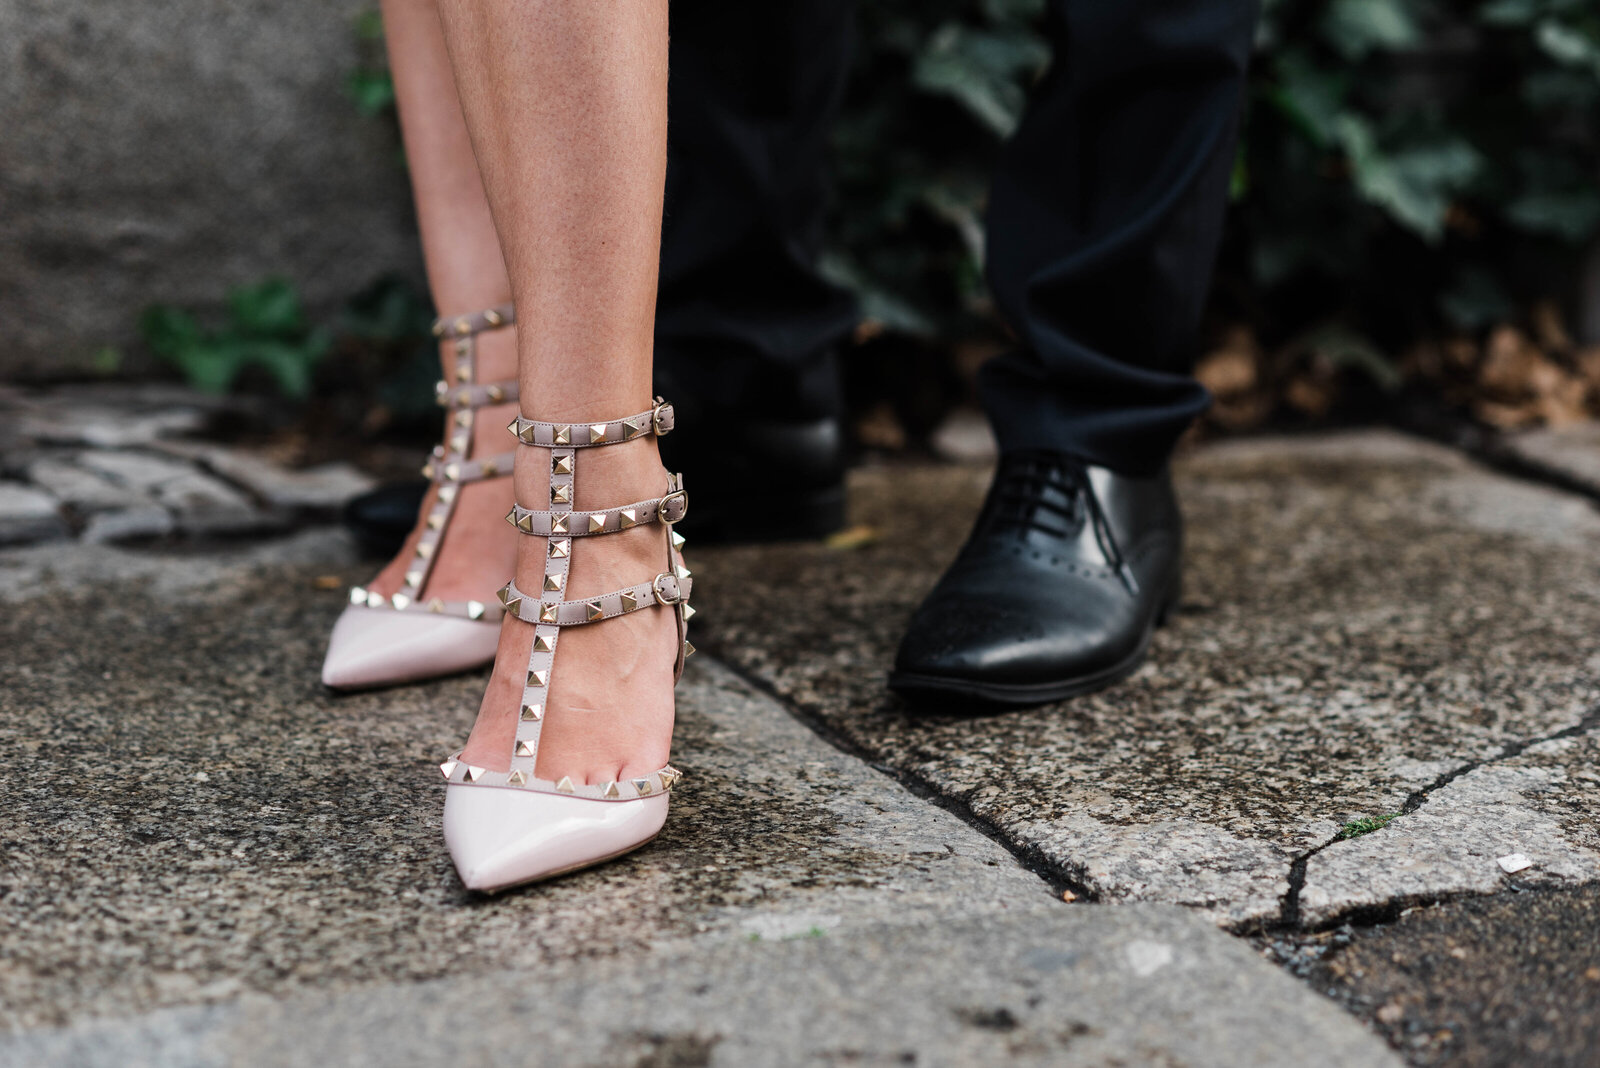 Detail photo of high heels and dress shoes